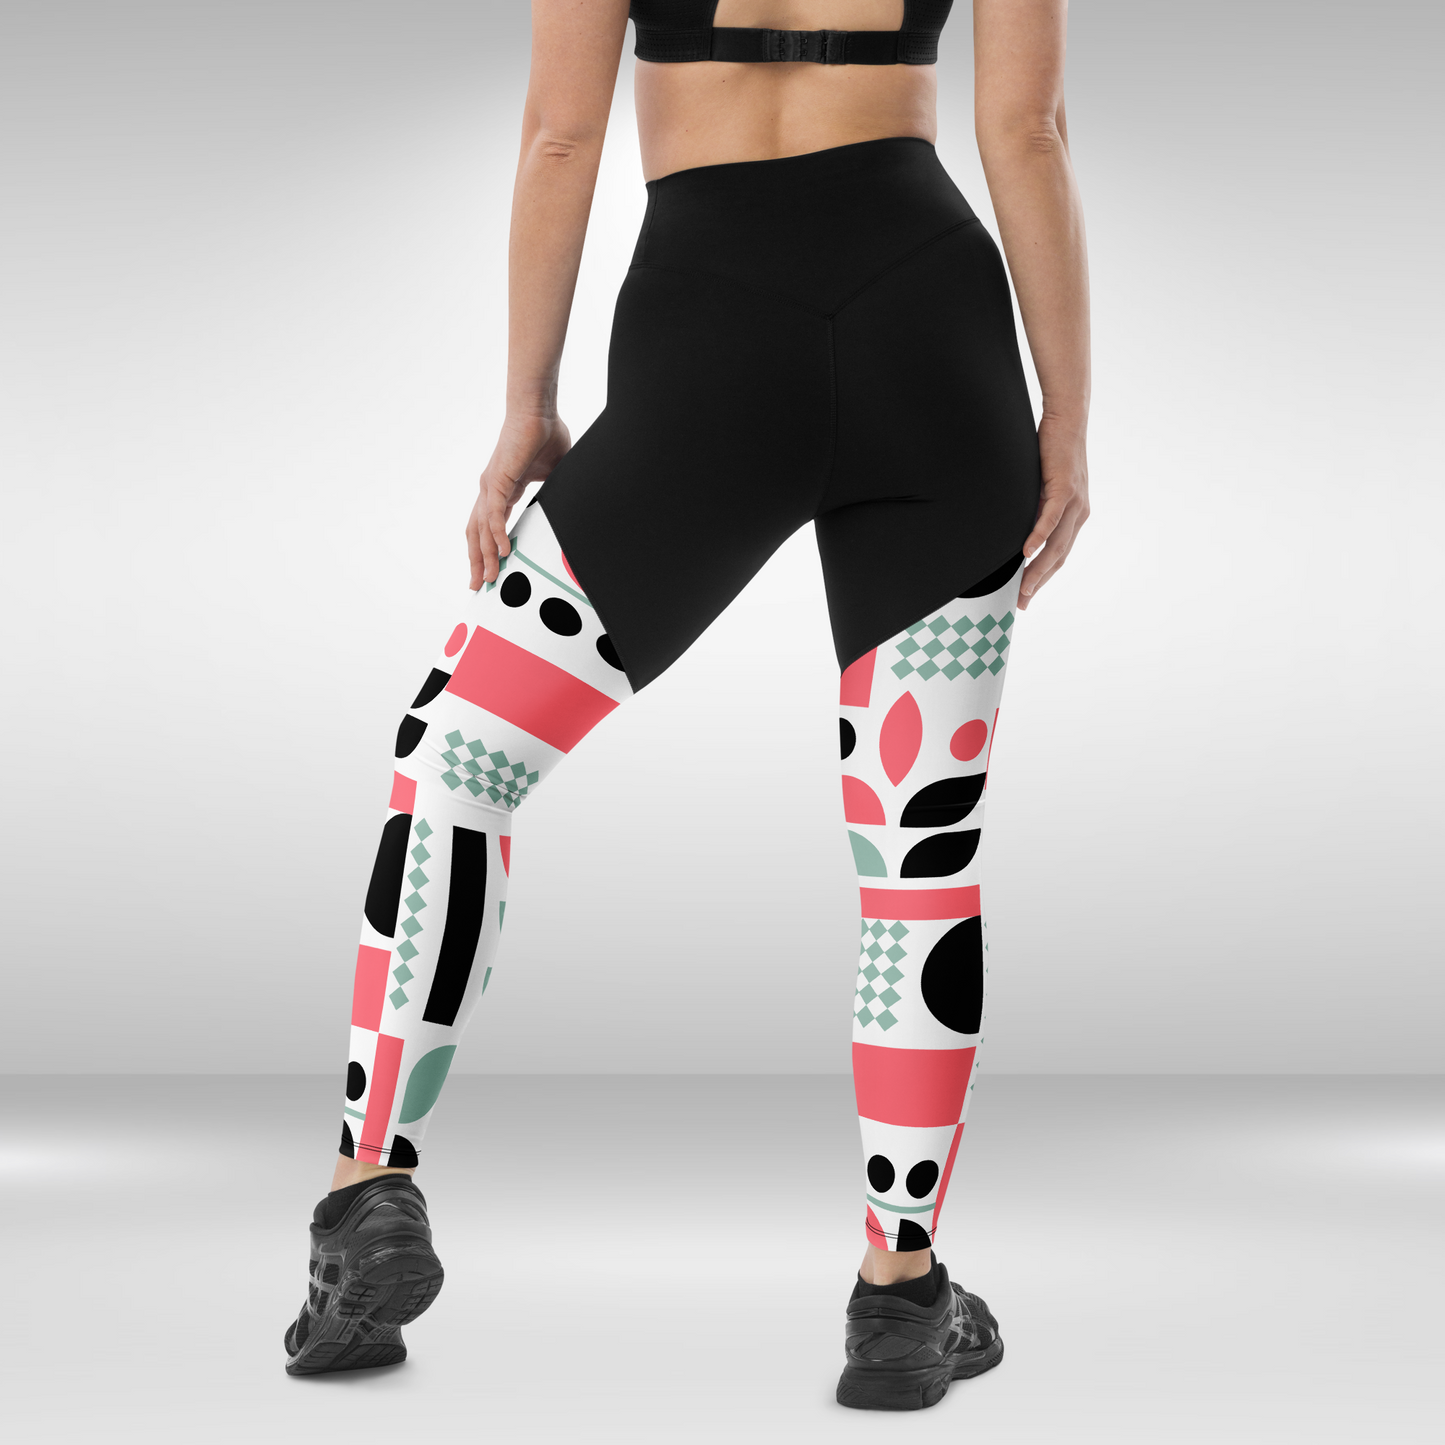 Women Compression Leggings - White and Pink Abstract Print